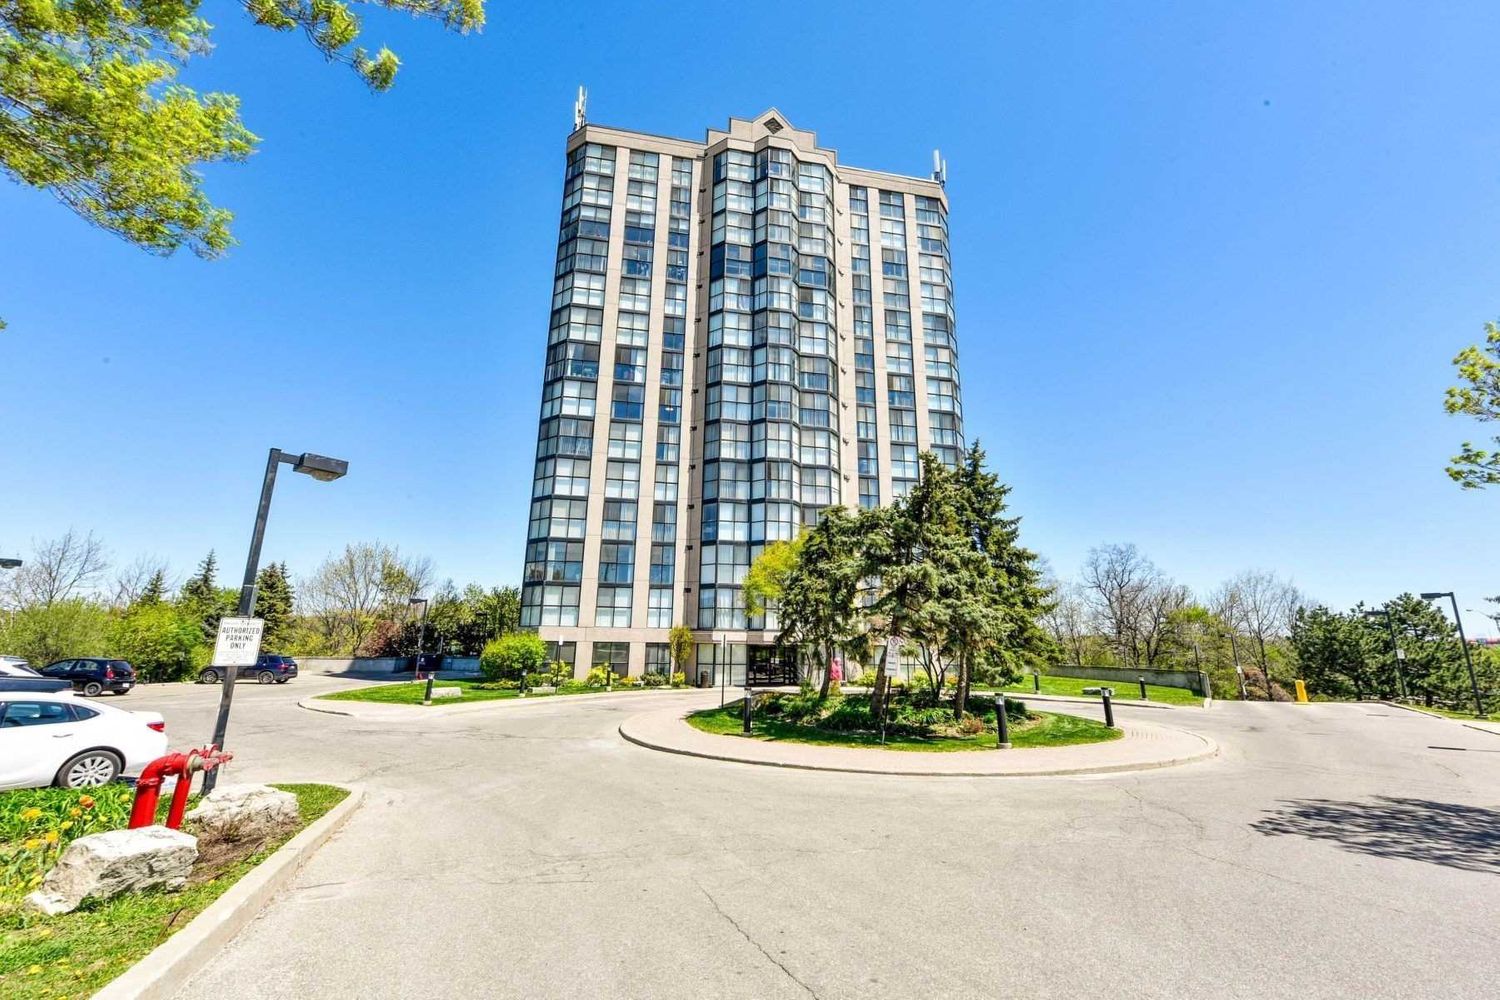 600 Rexdale Boulevard. Riverpark Residences is located in  Etobicoke, Toronto - image #3 of 3